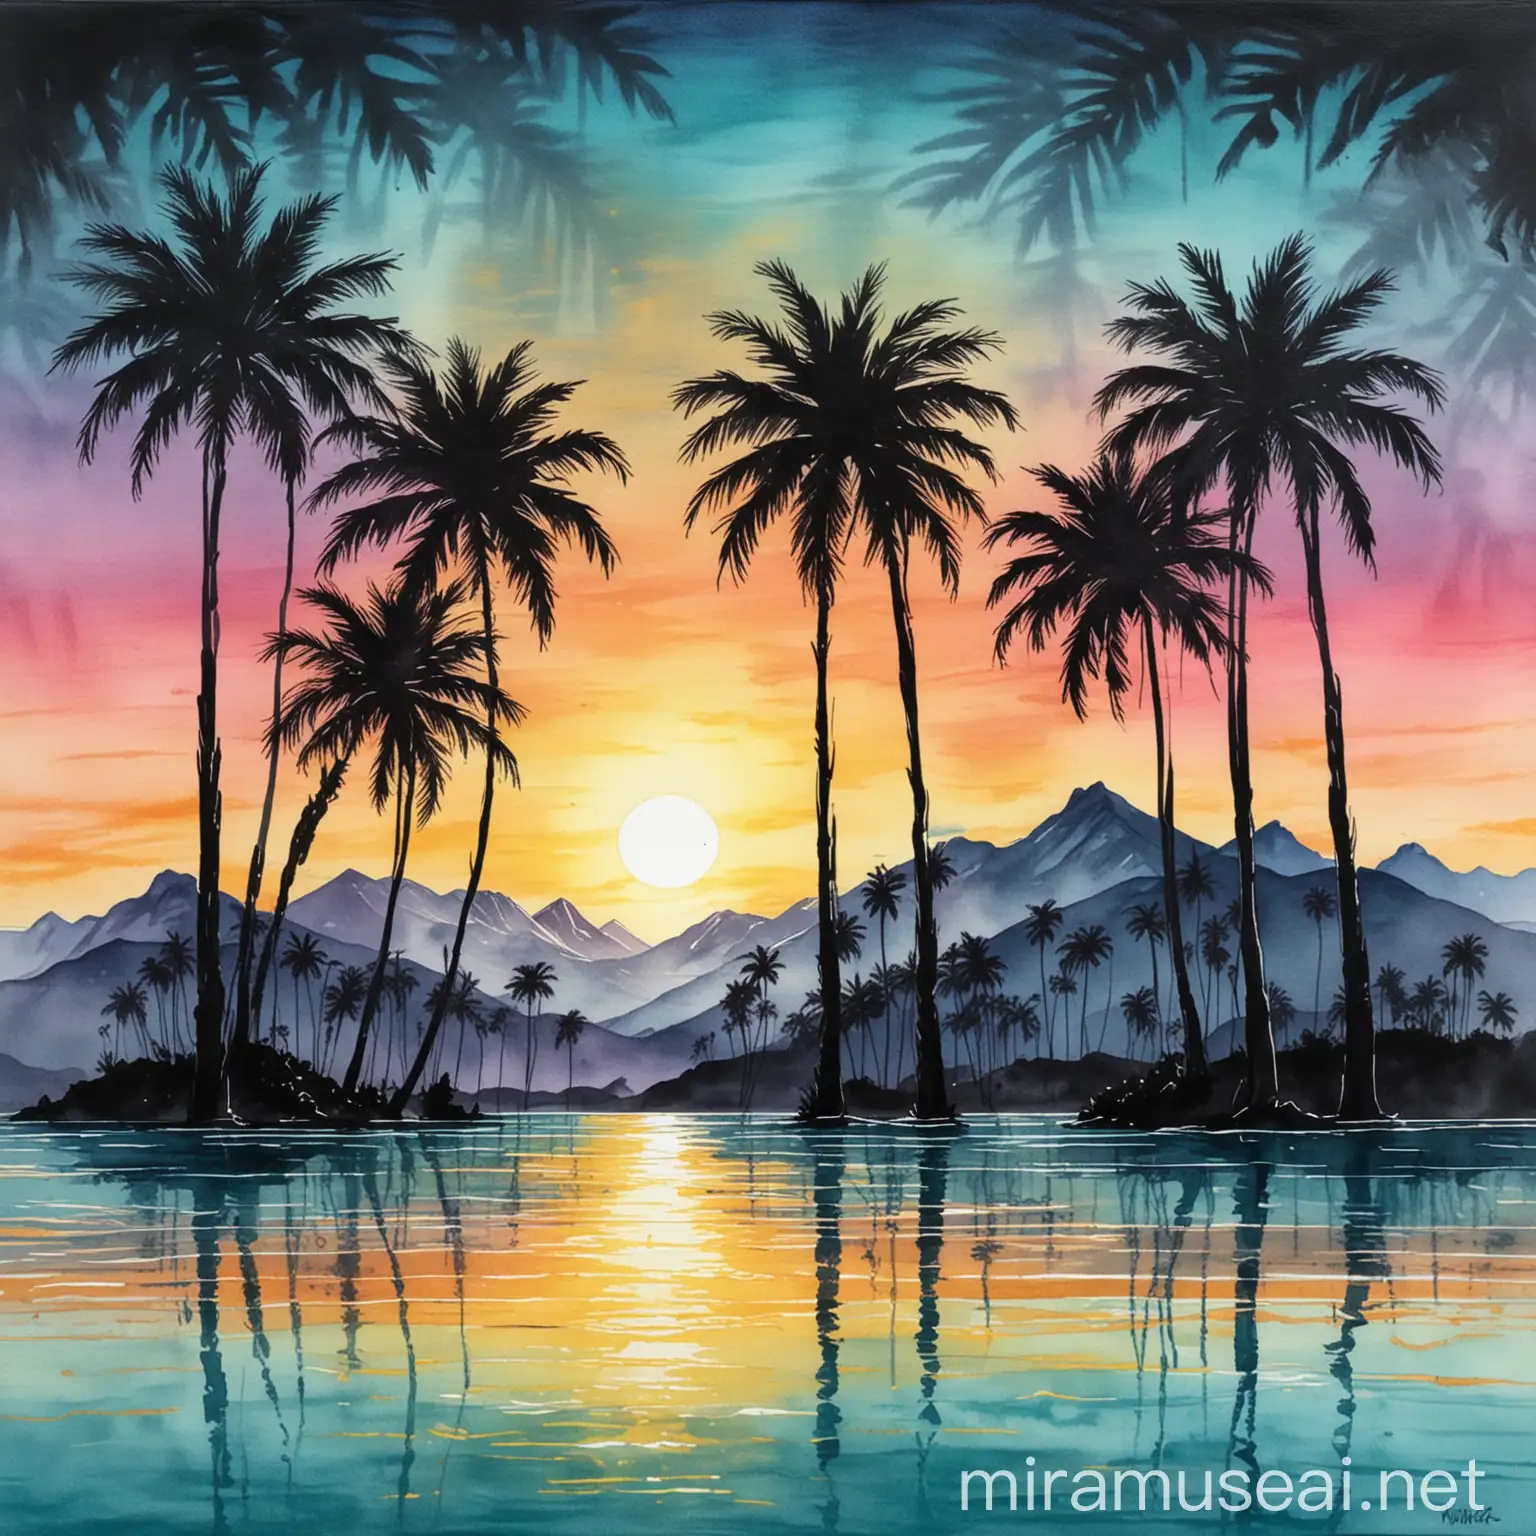 Vibrant Sunset with Palm Trees Silhouettes Blue and Teal Watercolor Landscape